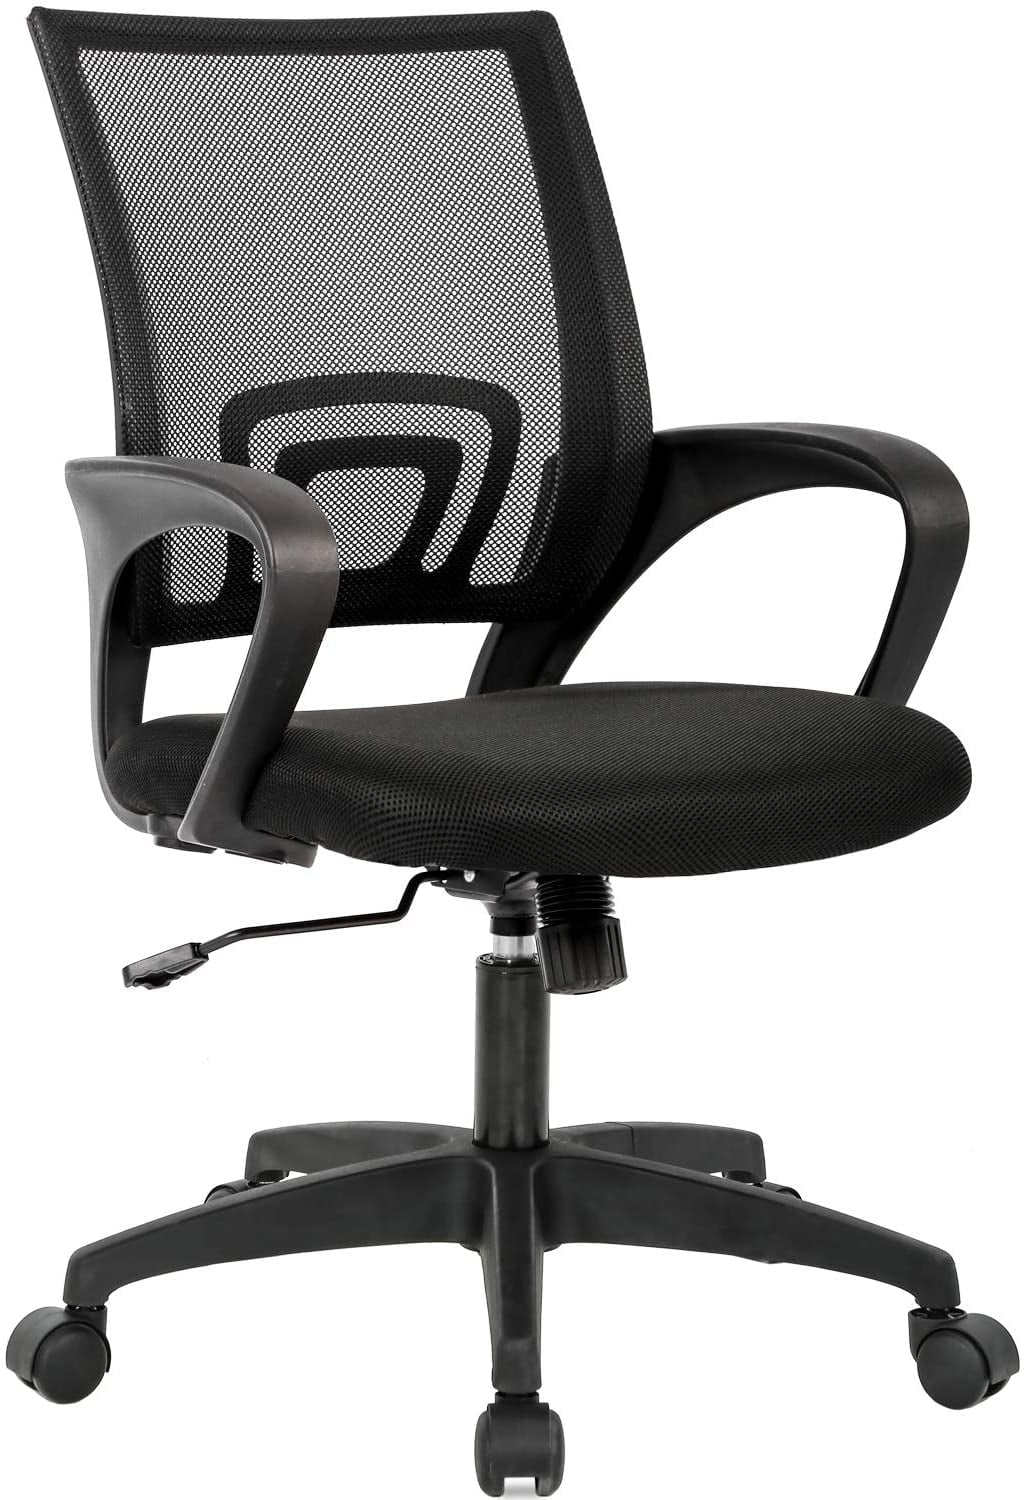 Ergonomic Computer Desk Chair Executive Mesh Office Chair High Back Swivel Chair with Lumbar Support Office Chair Black